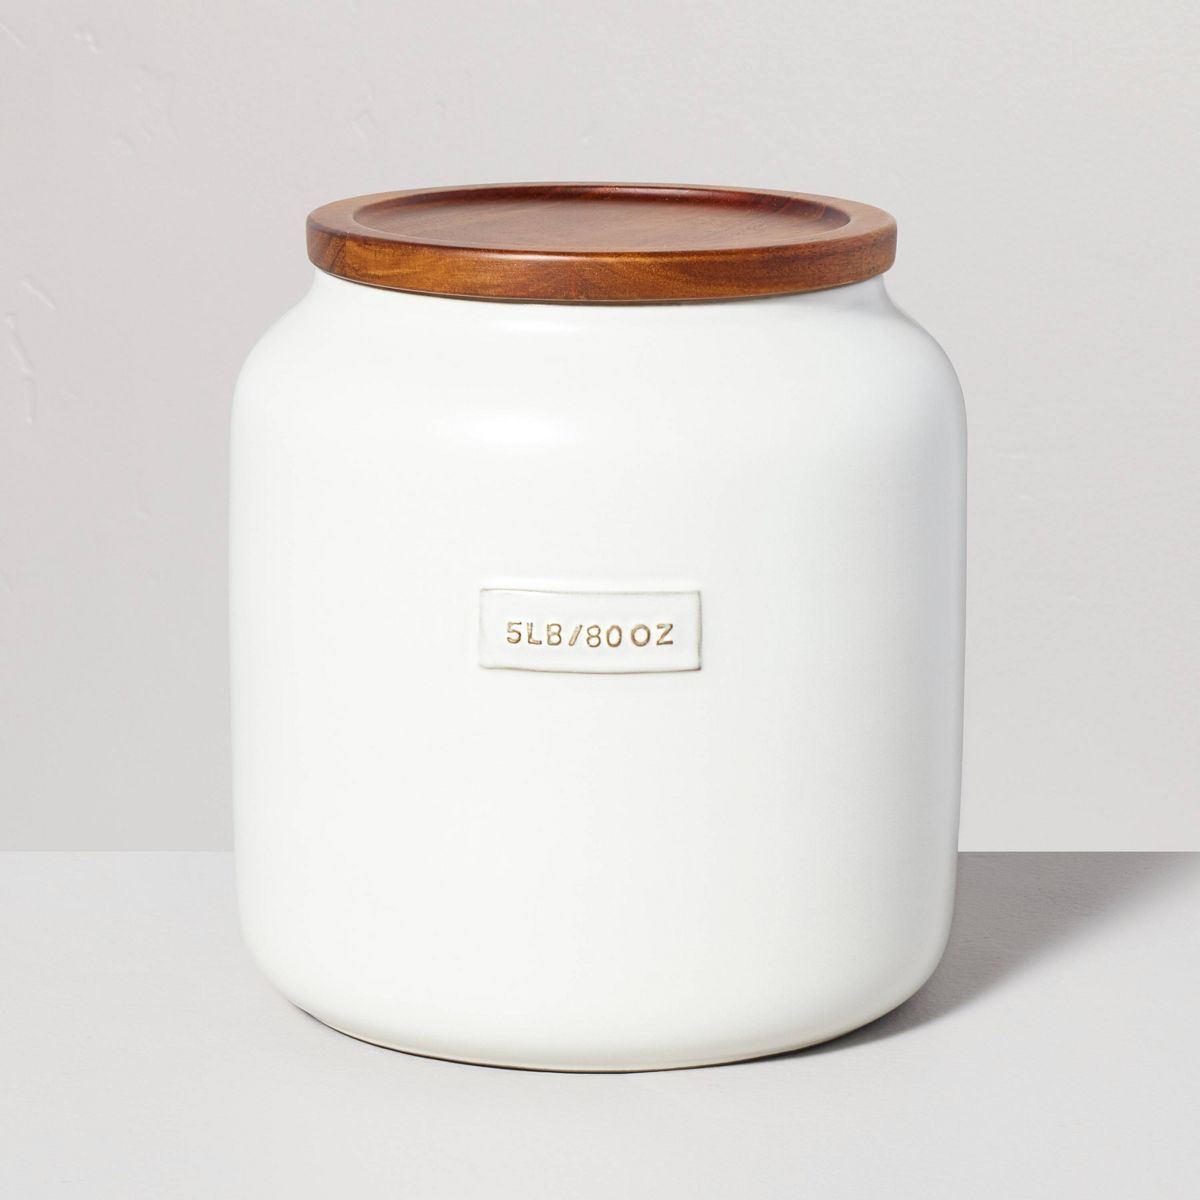 Dry Goods Stoneware Canister with Wood Lid Cream/Brown - Hearth & Hand™ with Magnolia | Target